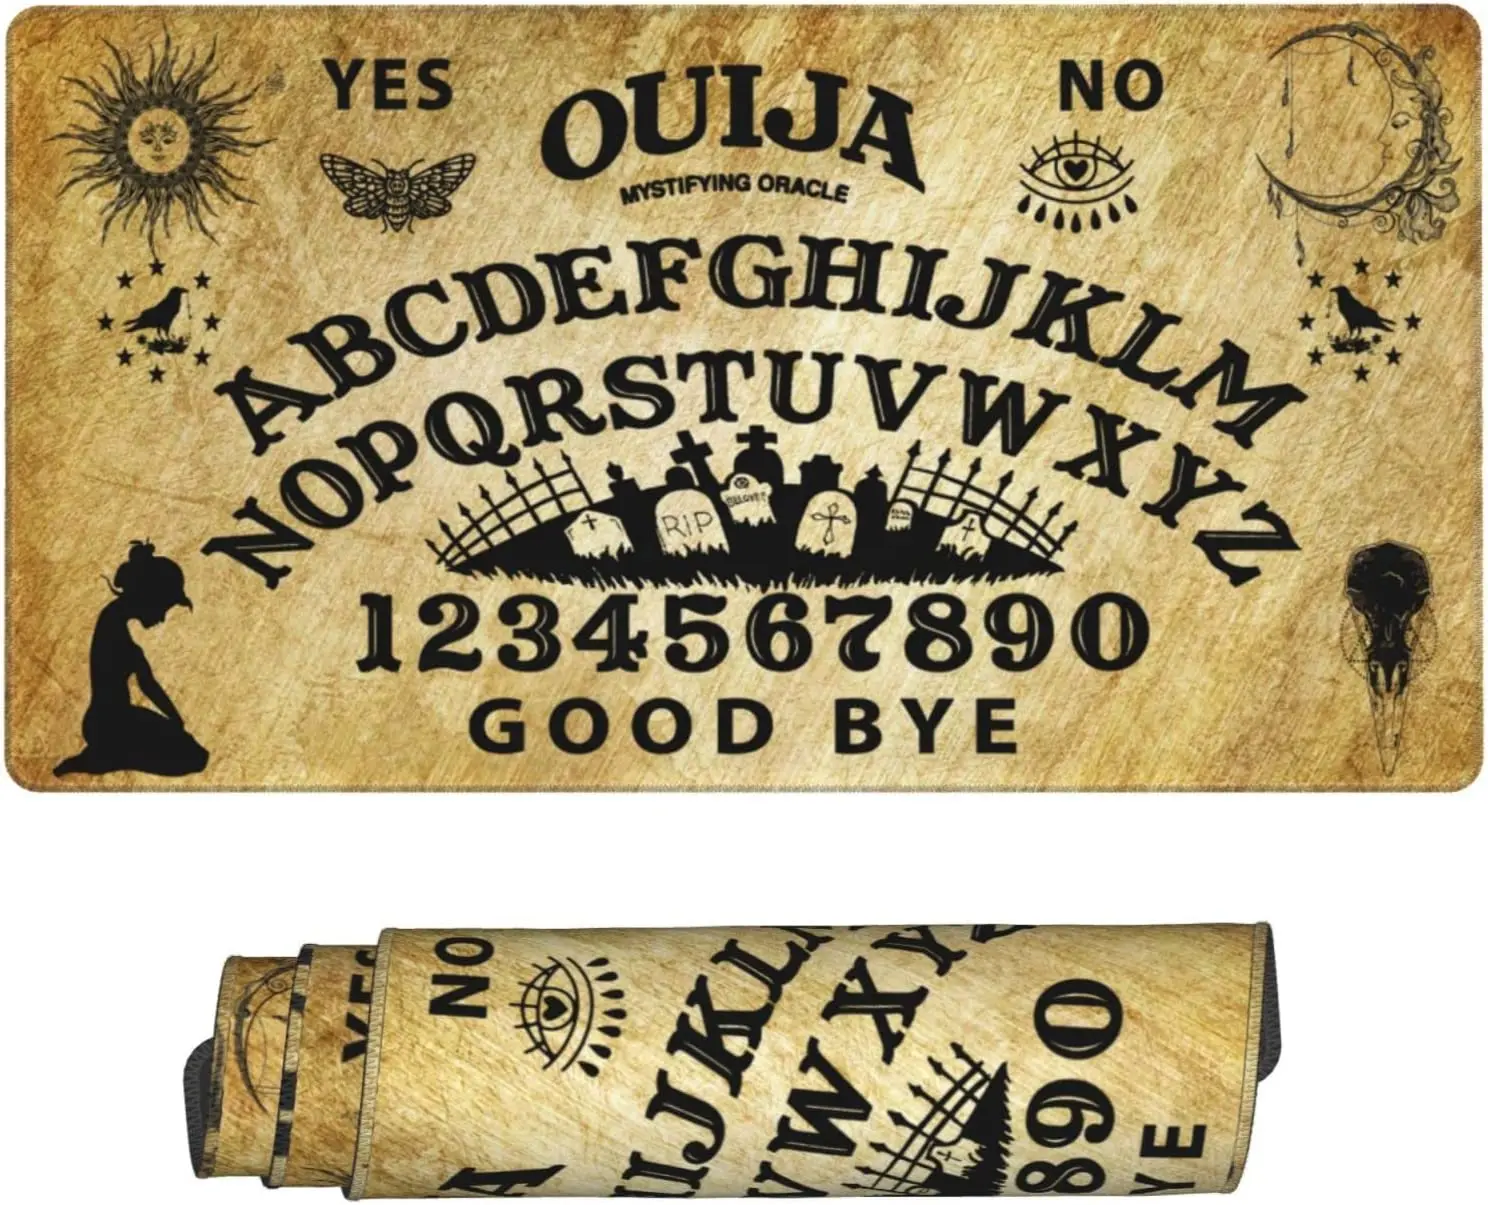 Ouija Board Divination Heart Cemetery Vintage Mousepad Accessories Extended XL Stitched Edge Rubber Sole 31.5X11.8